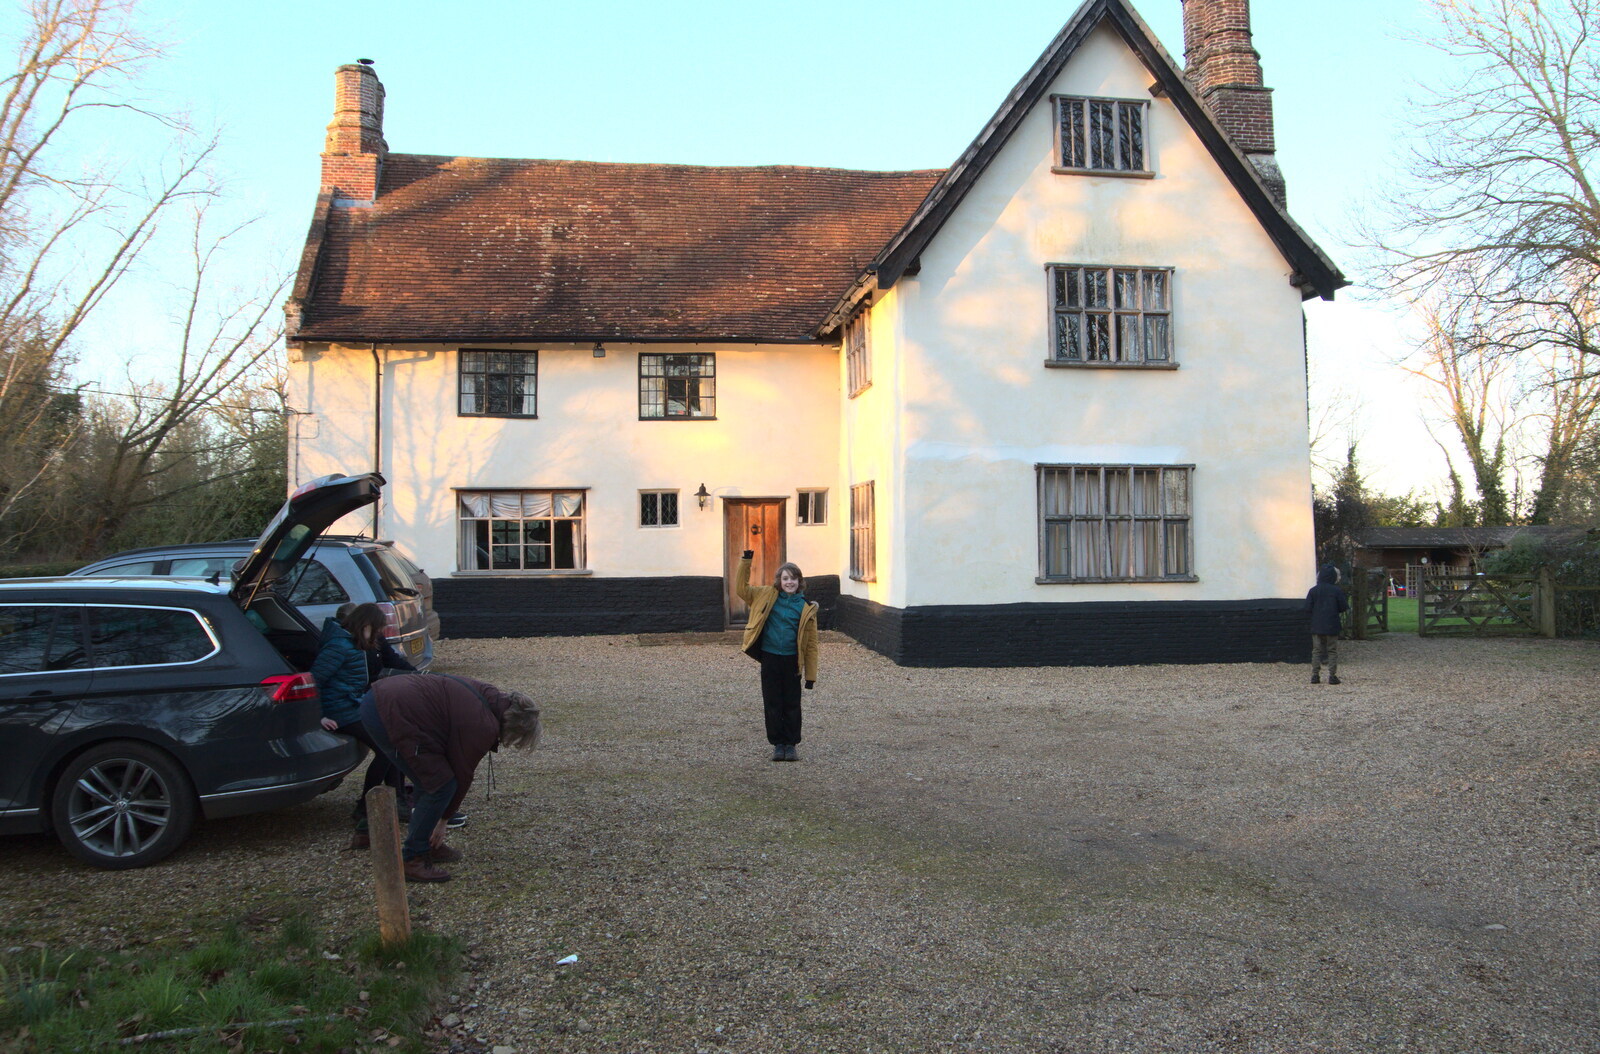 Fred outside the house from Snowdrops at Talconeston Hall, Tacolneston, Norfolk - 7th February 2020